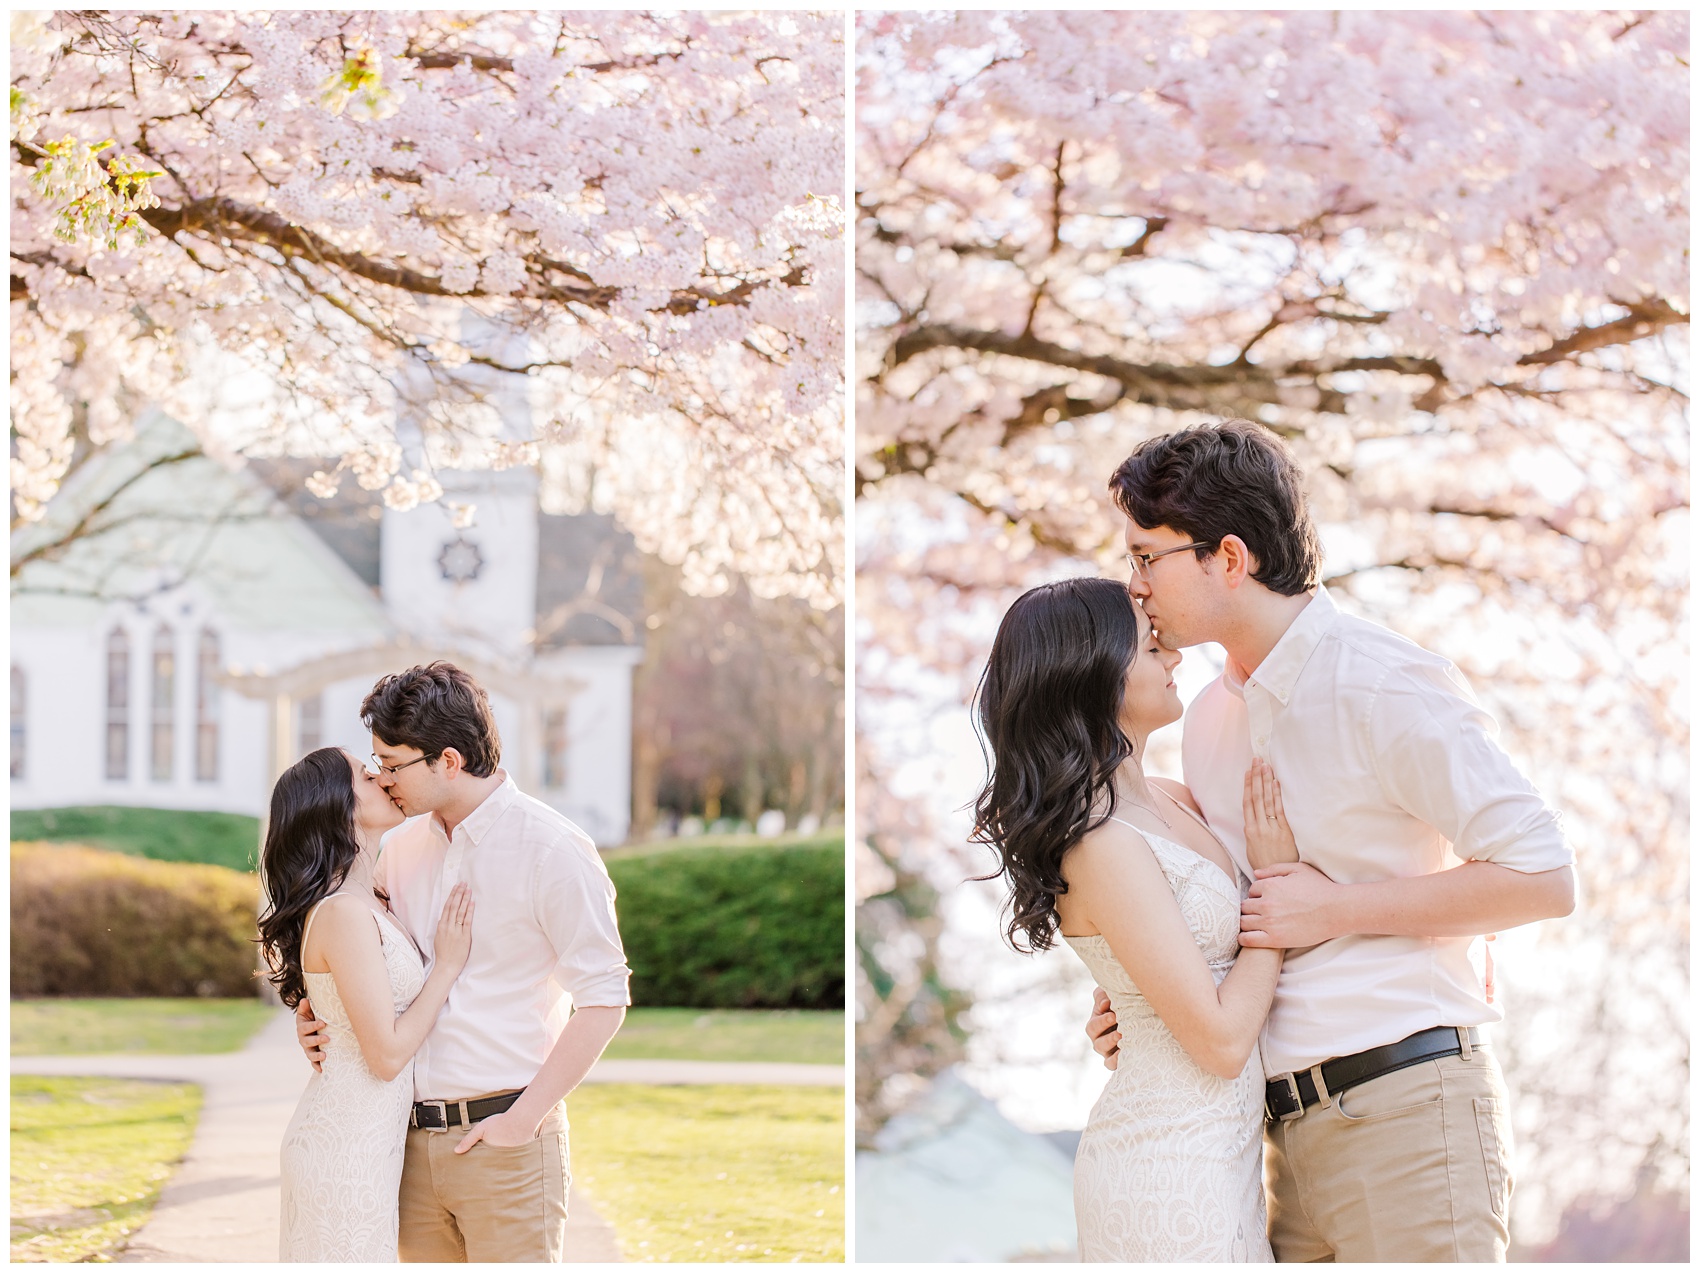 Richmond BC Engagement Photos with Cherry Blossoms at Minoru Chapel, Vancouver Wedding Photographer